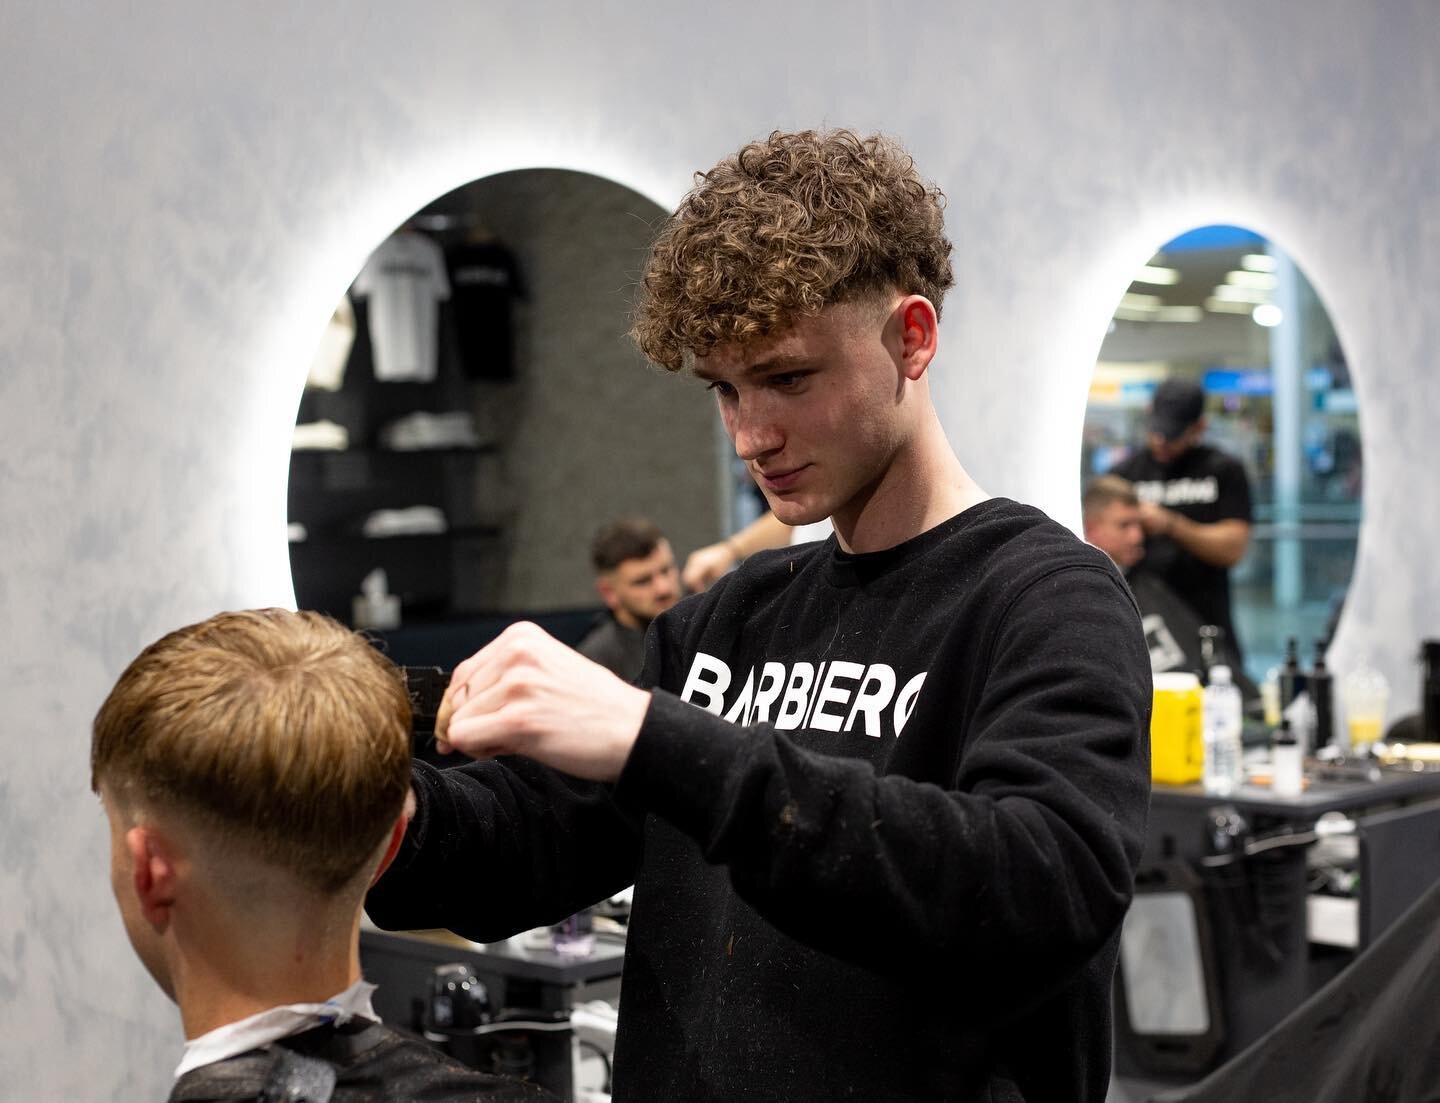 Looking for a fresh new look? Let our expert barbers help you find the perfect style to suit your individual taste and personality. 

Whether you're going for a classic cut or something more modern and daring, we've got you covered. Our team is dedic